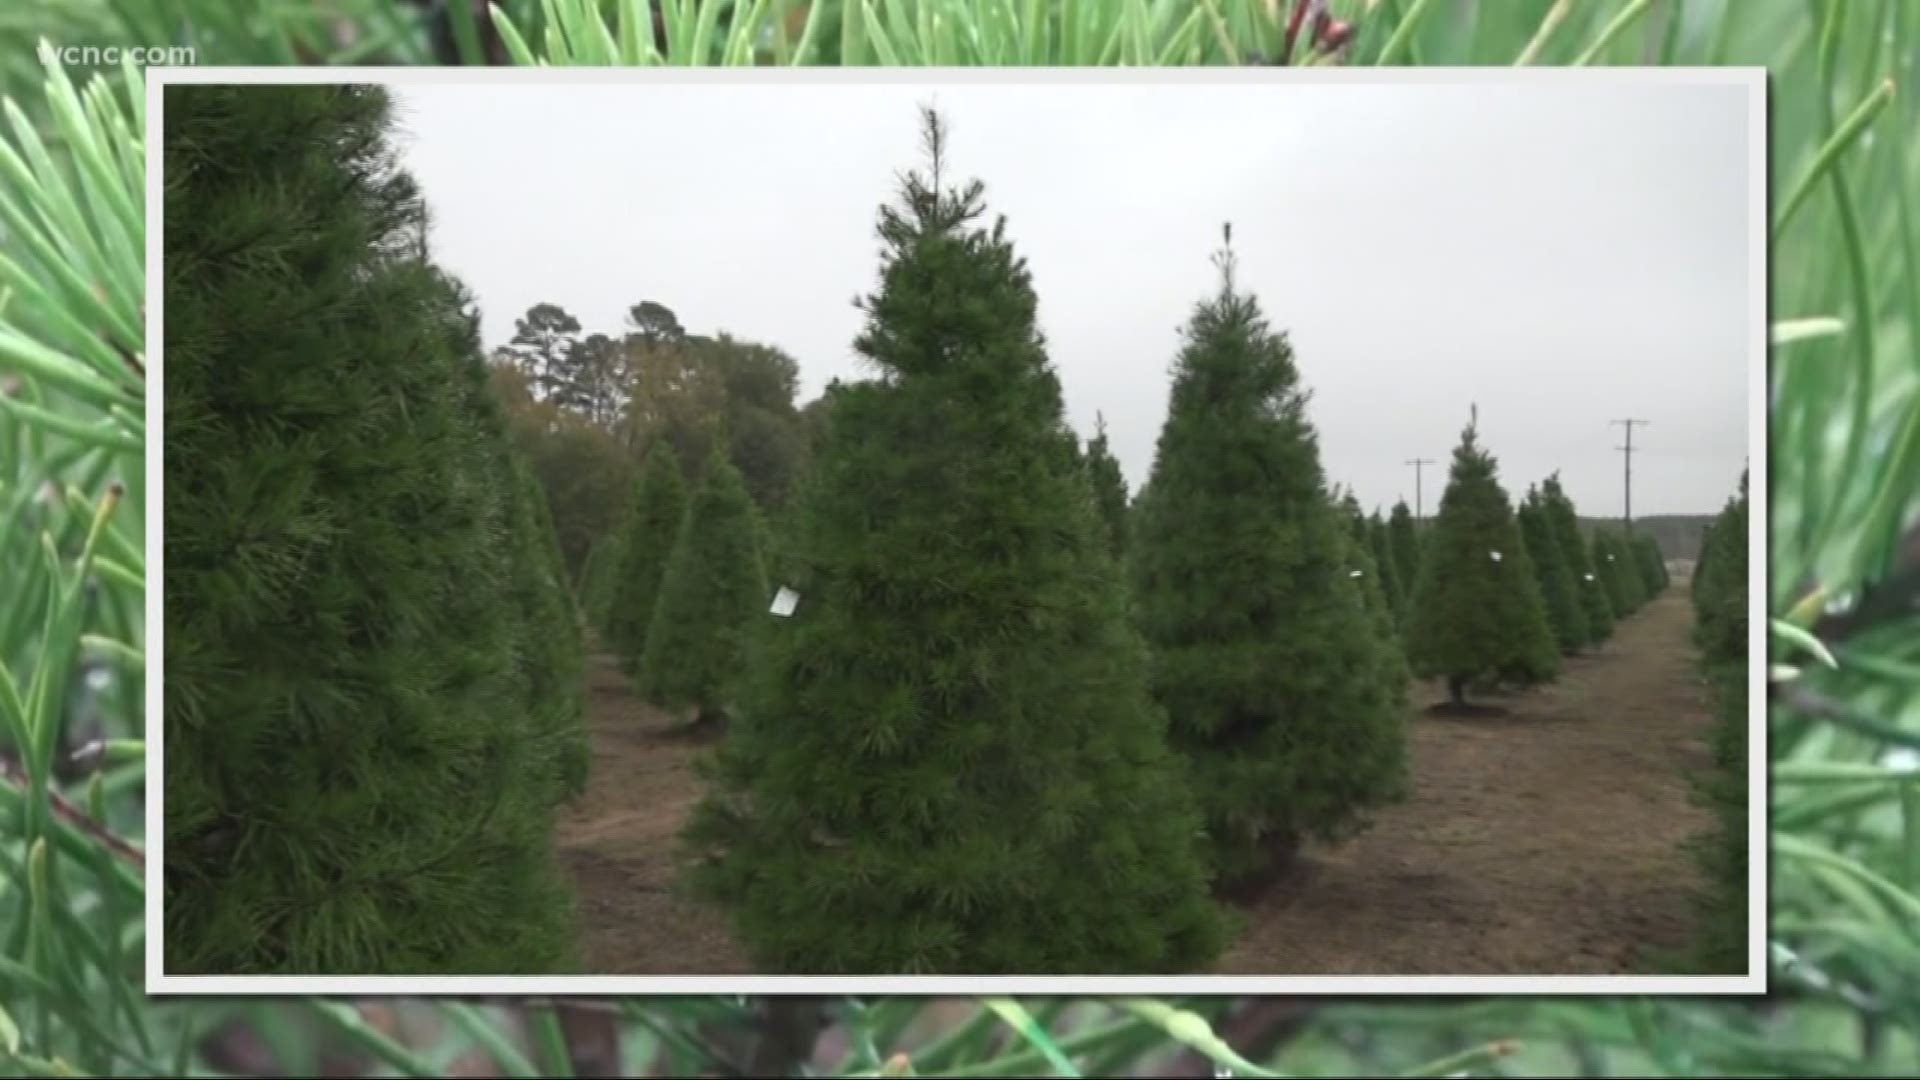 Would you rather have a real Christmas tree or do you go artificial? Right now, more people have fake trees, but that could soon change.